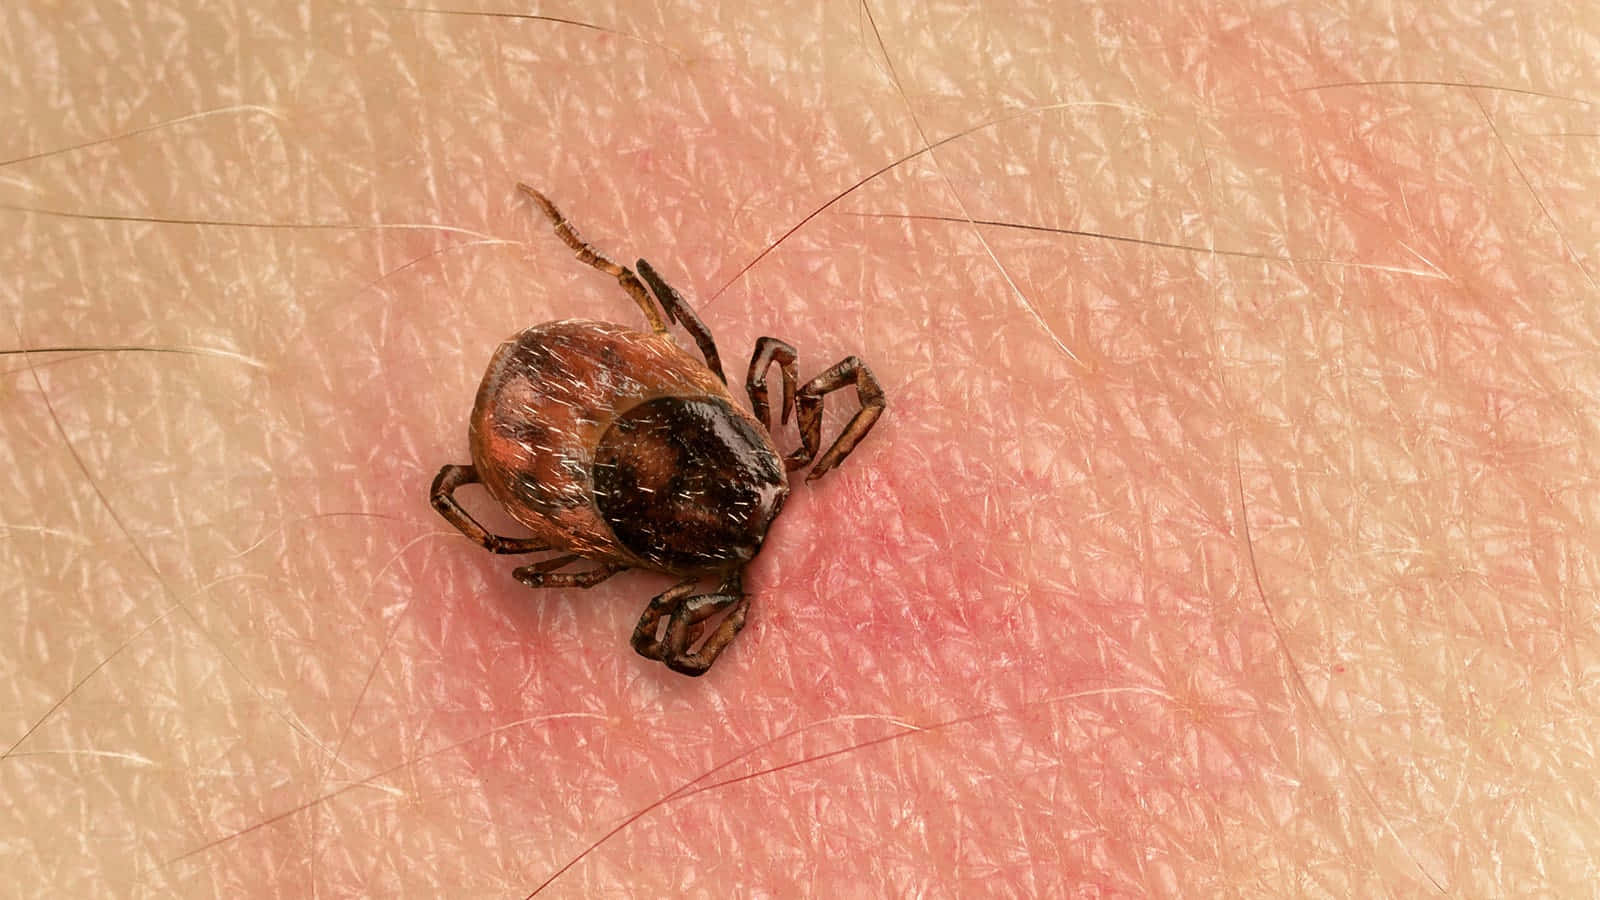 Dead Tick On Skin Pictures